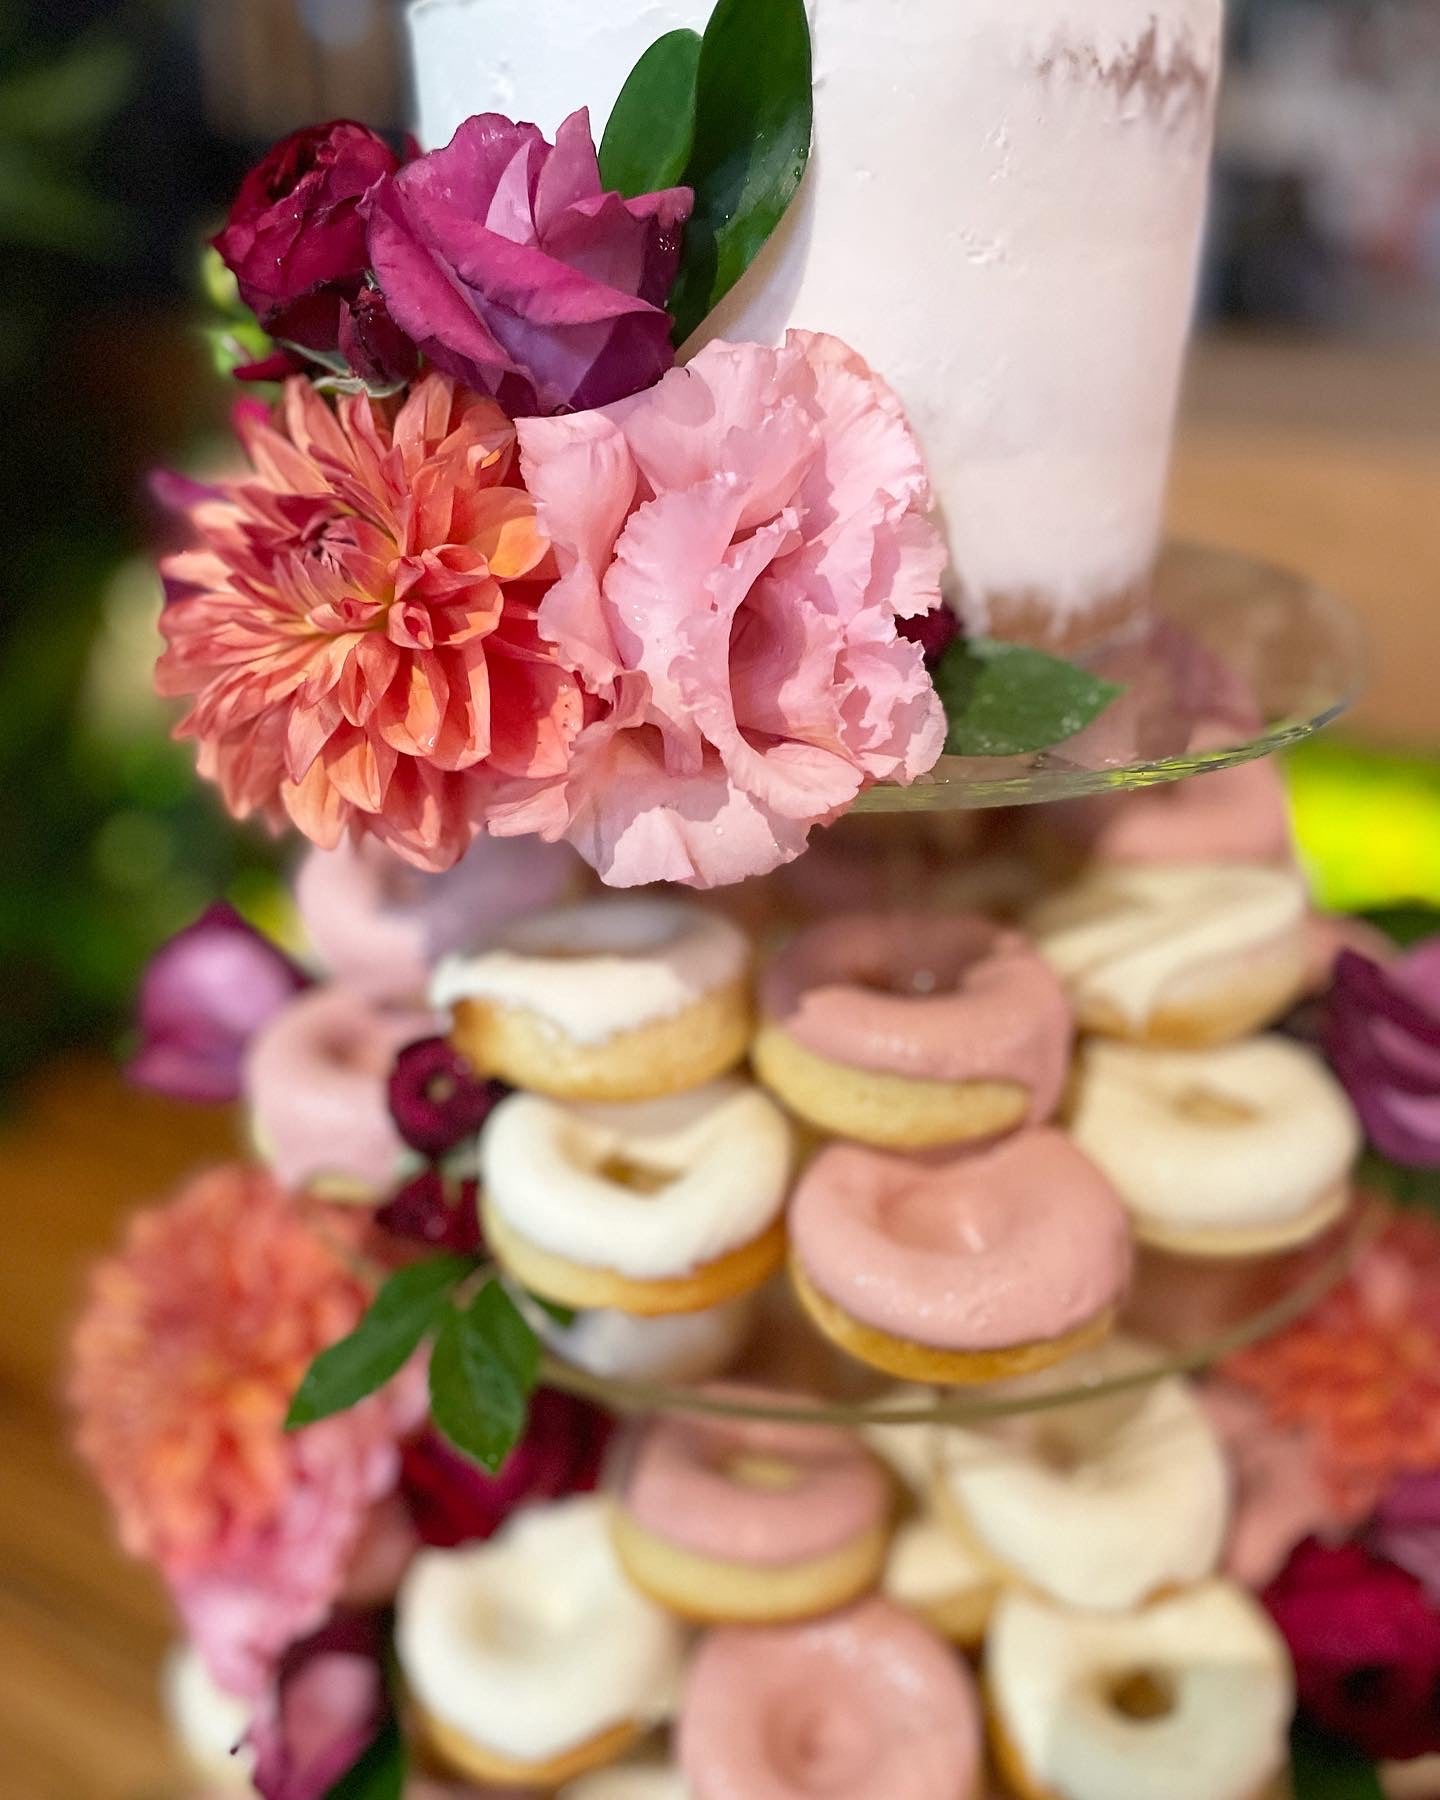 Donut Tower Cake in Bright Colour Flowers